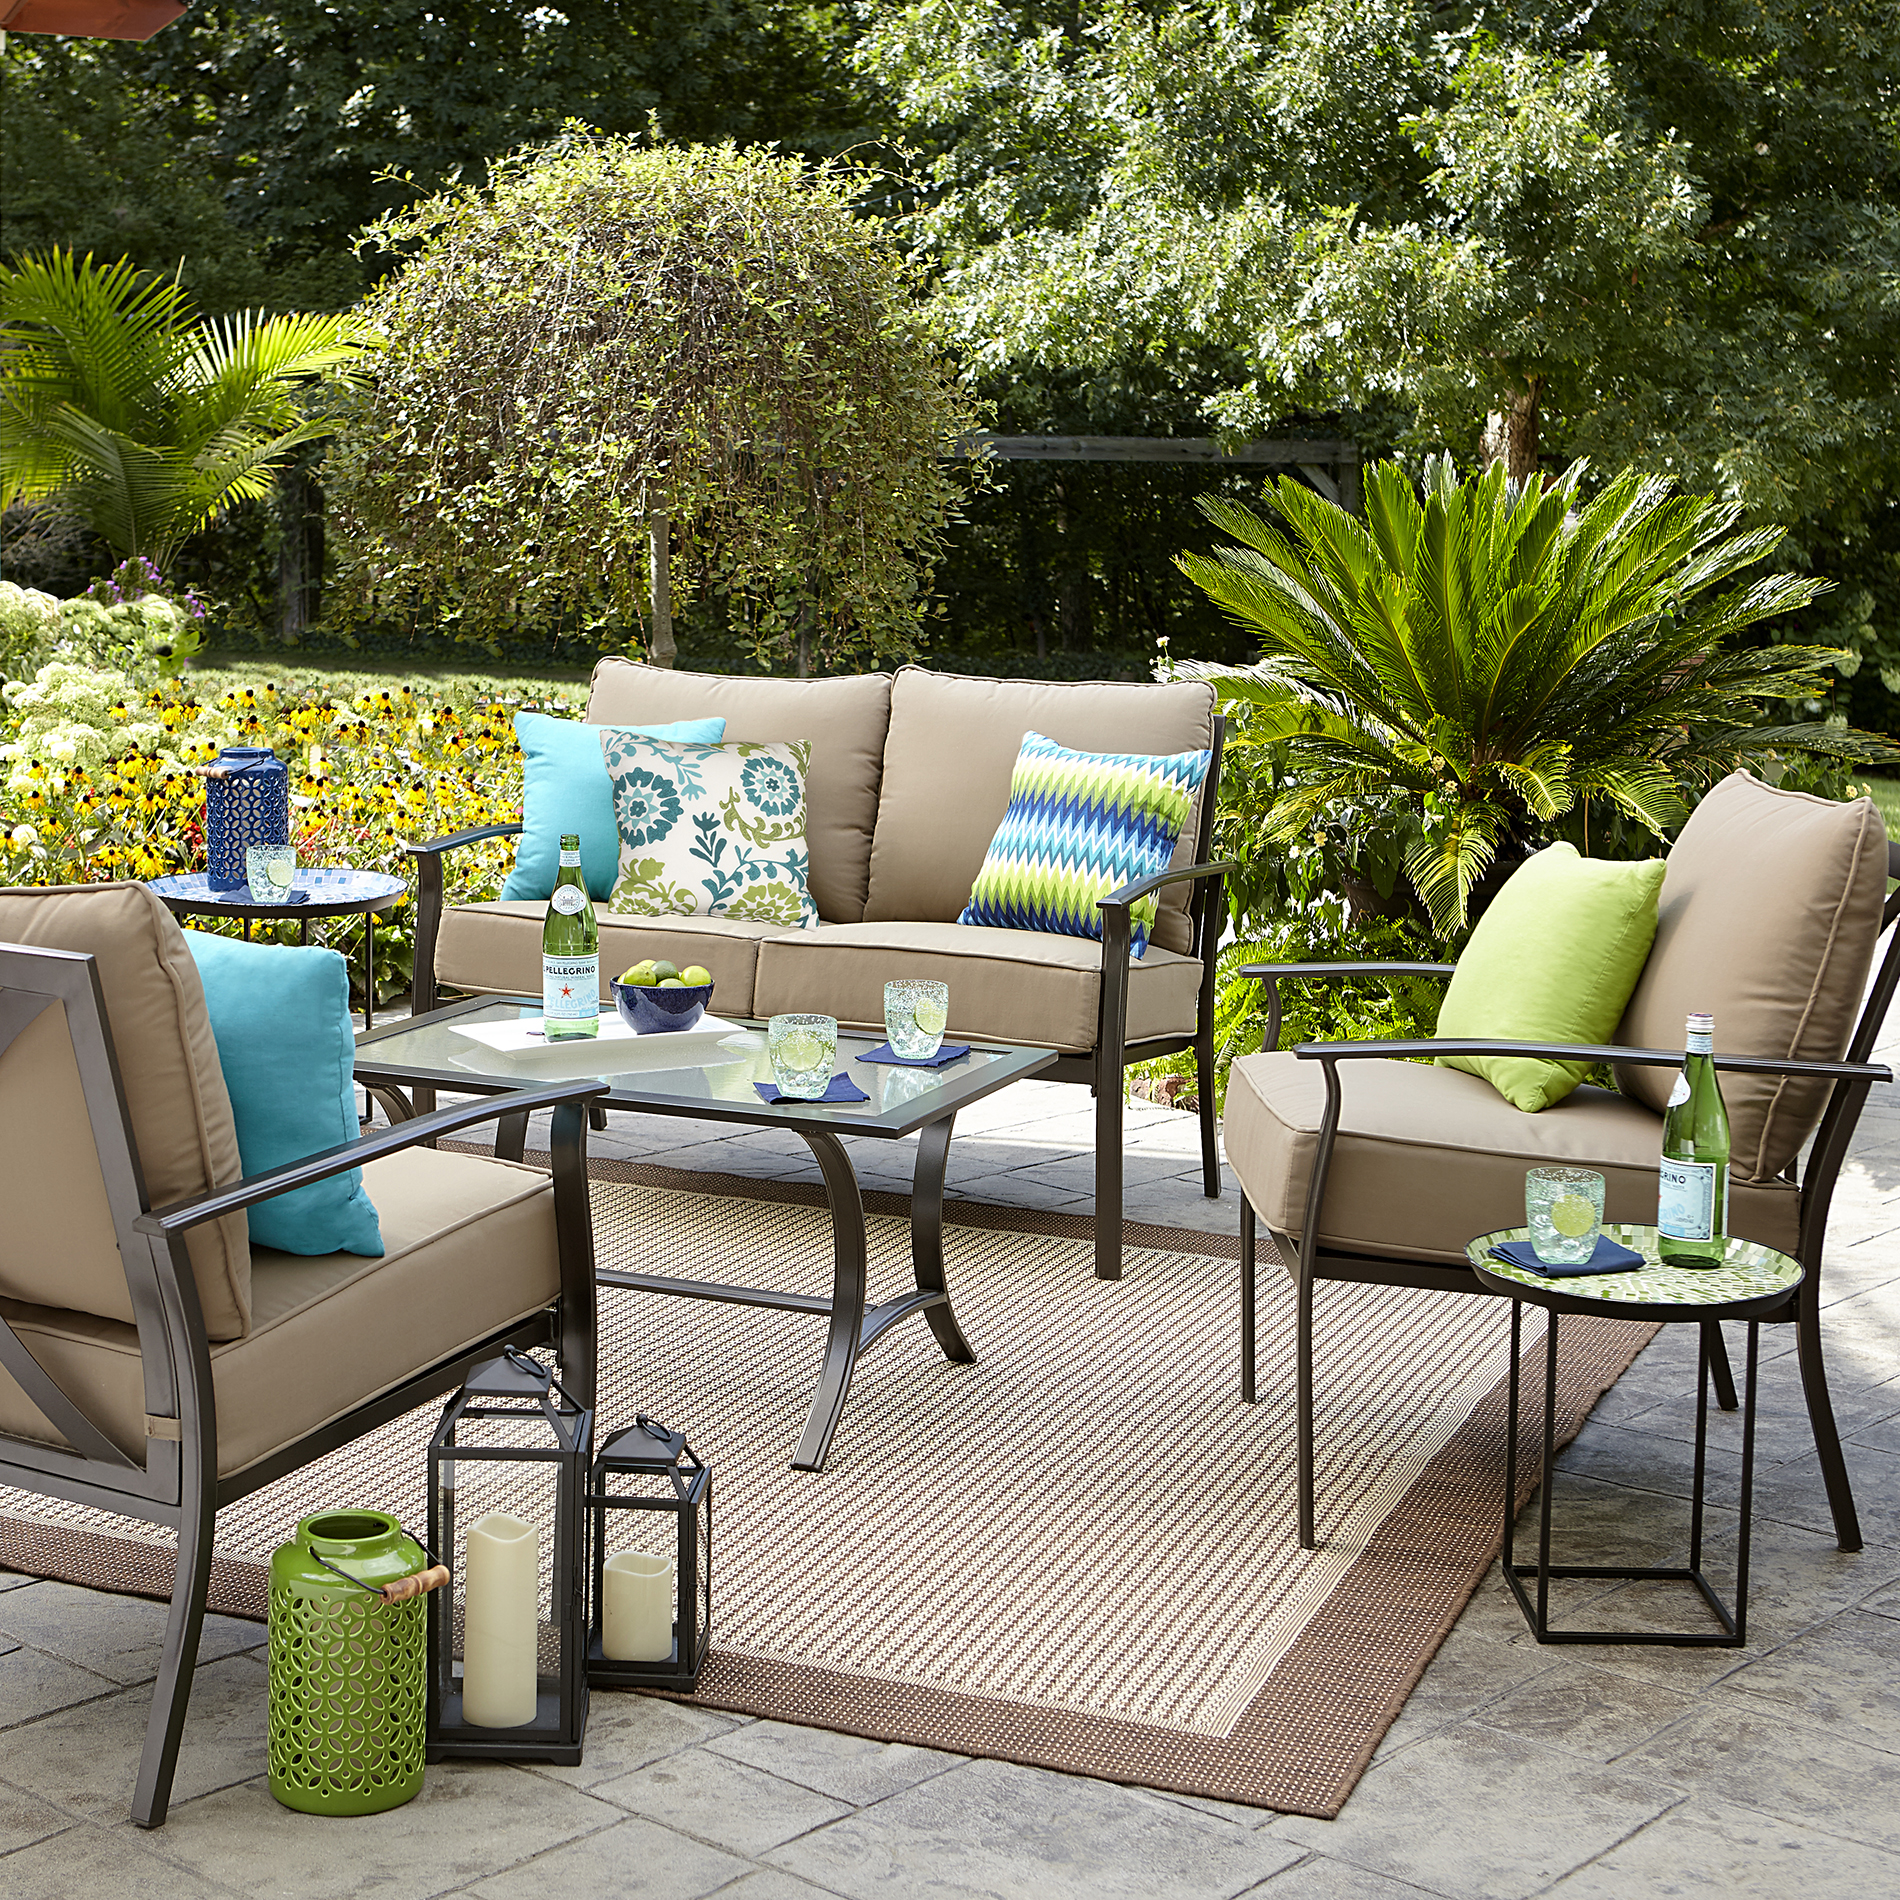 Creating A Stylish Outdoor Oasis With The Right Furniture